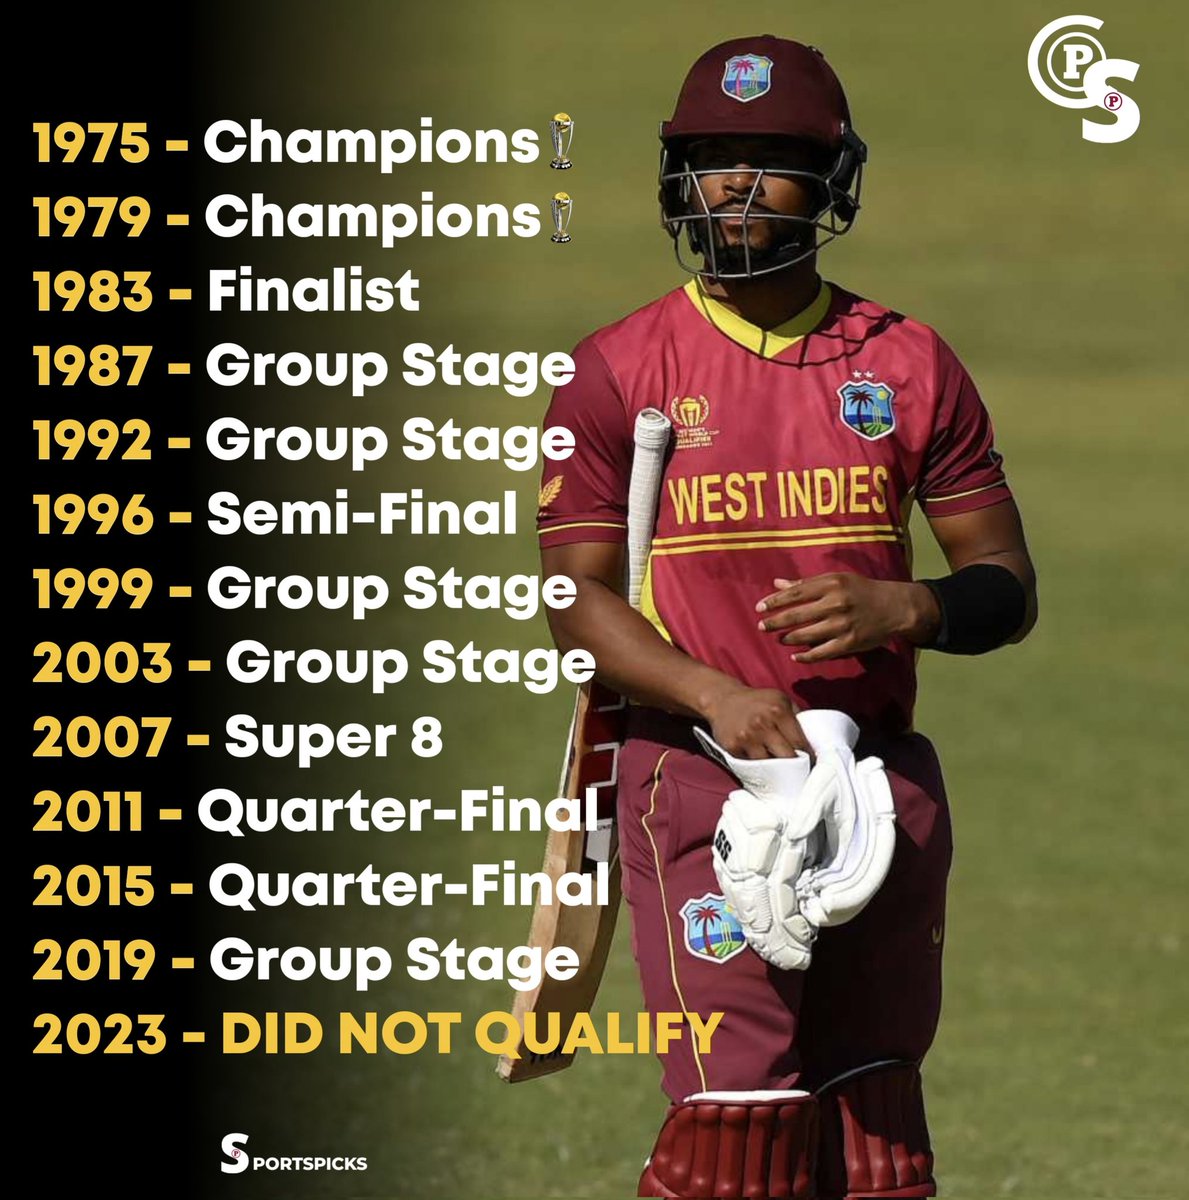 West Indies in ICC ODI Cricket World Cup 💔

#CricketTwitter    #WestIndies #Ashes #CWC23Qualifiers #WorldCup2023